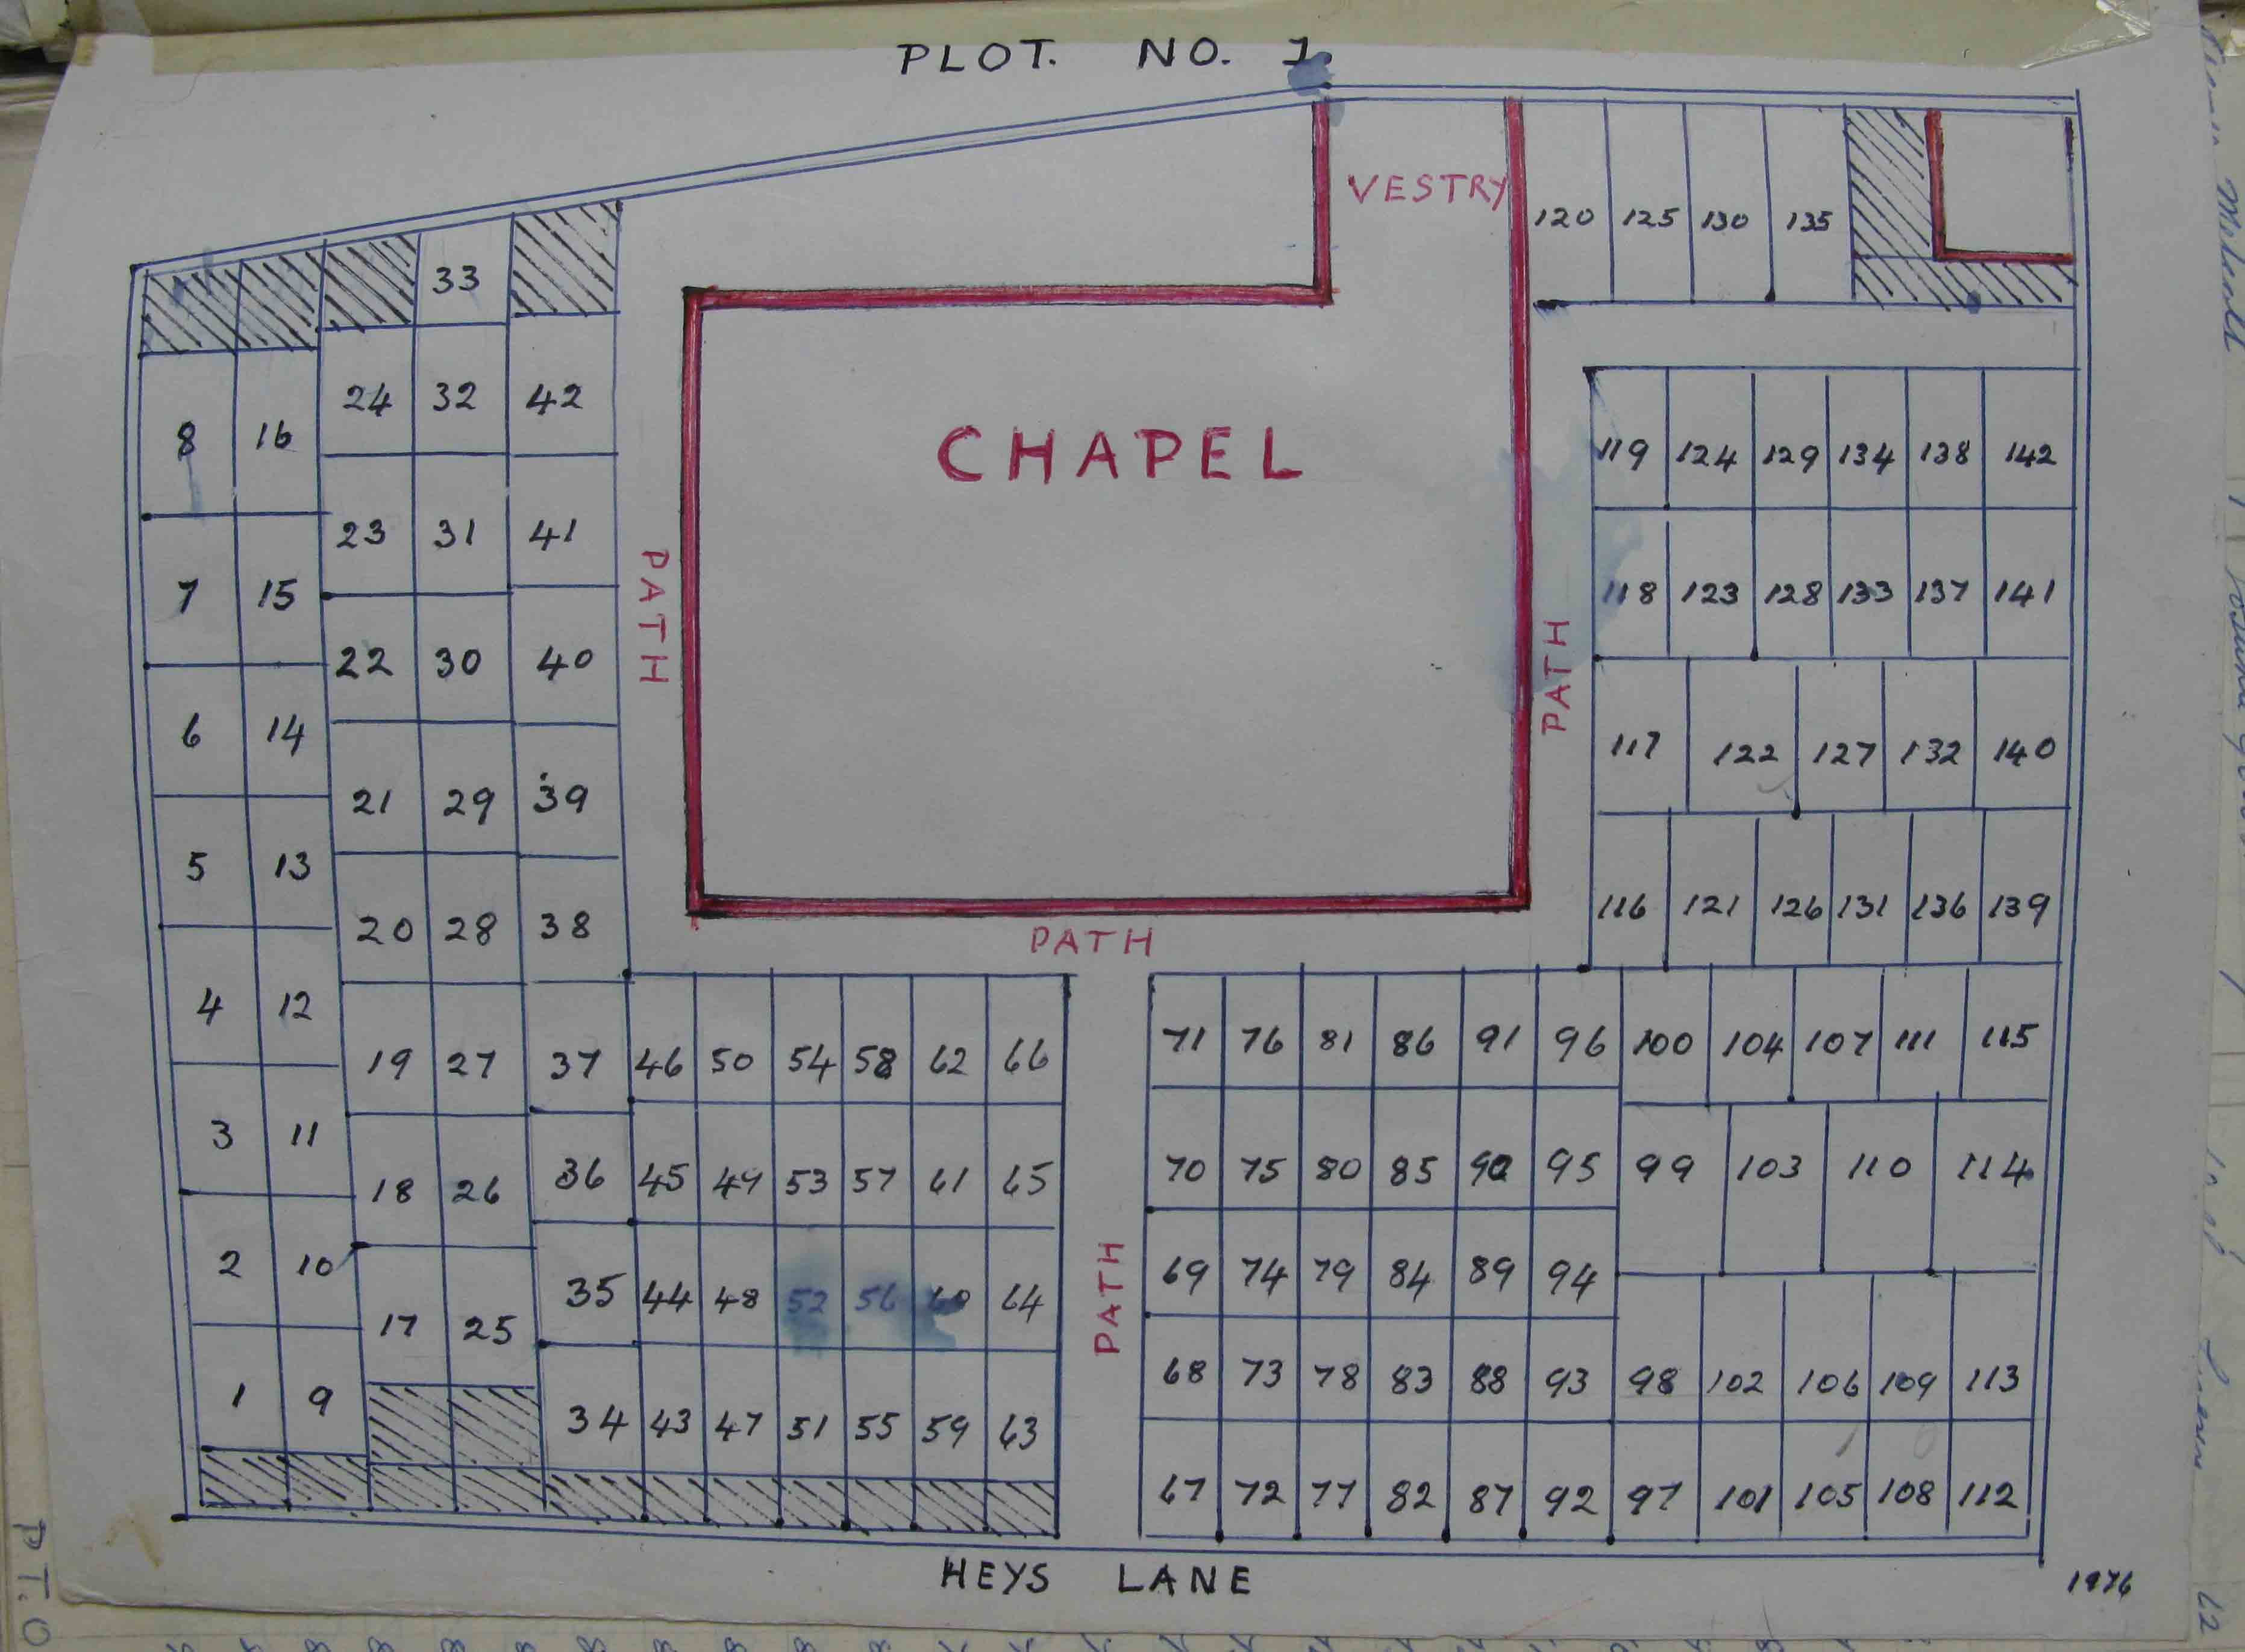 A Map of Plot 1 in the Cemetery at New Row Methodist. A higher resolution image is available by clicking the link on the image. This file is over 1Mbyte in size. To download this map to your computer, right click and select 'save Target/Link as'. Do not select 'save image' or you will just get the lower resolution image seen on this page.